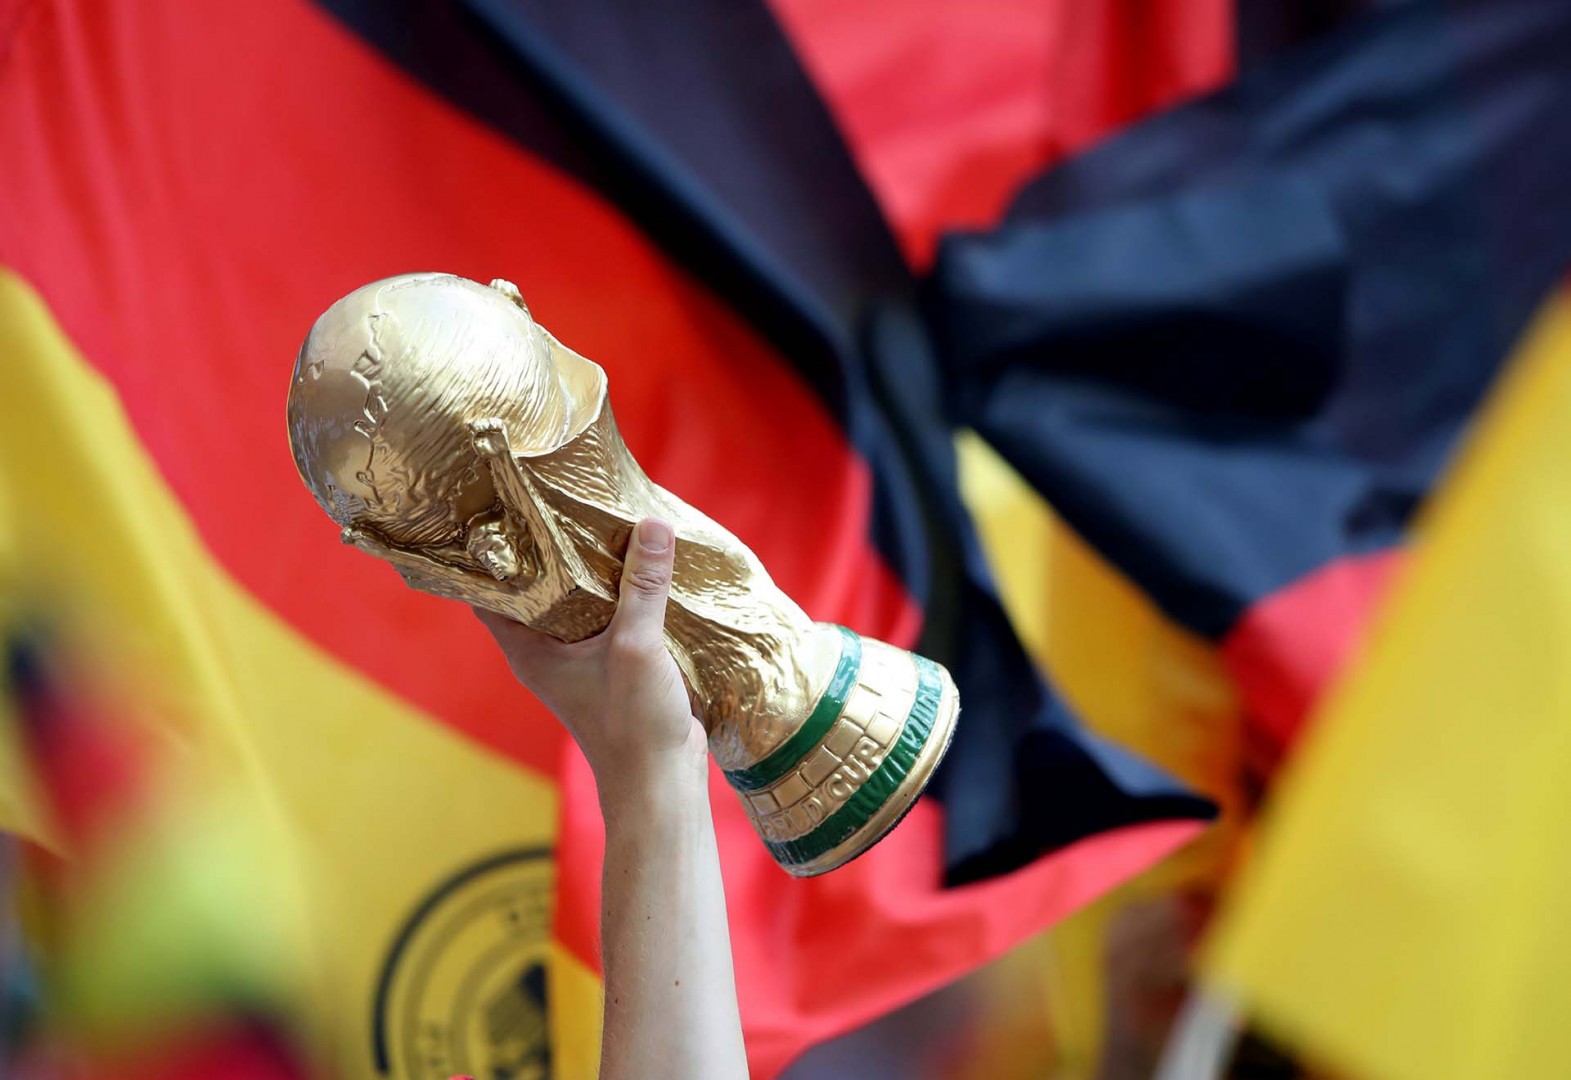 Soccer Football - World Cup - Group F - Germany vs Mexico - Luzhniki Stadium, Moscow, Russia - June 17, 2018   Fan holds up a replica World Cup trophy inside the stadium before the match   REUTERS/Carl Recine